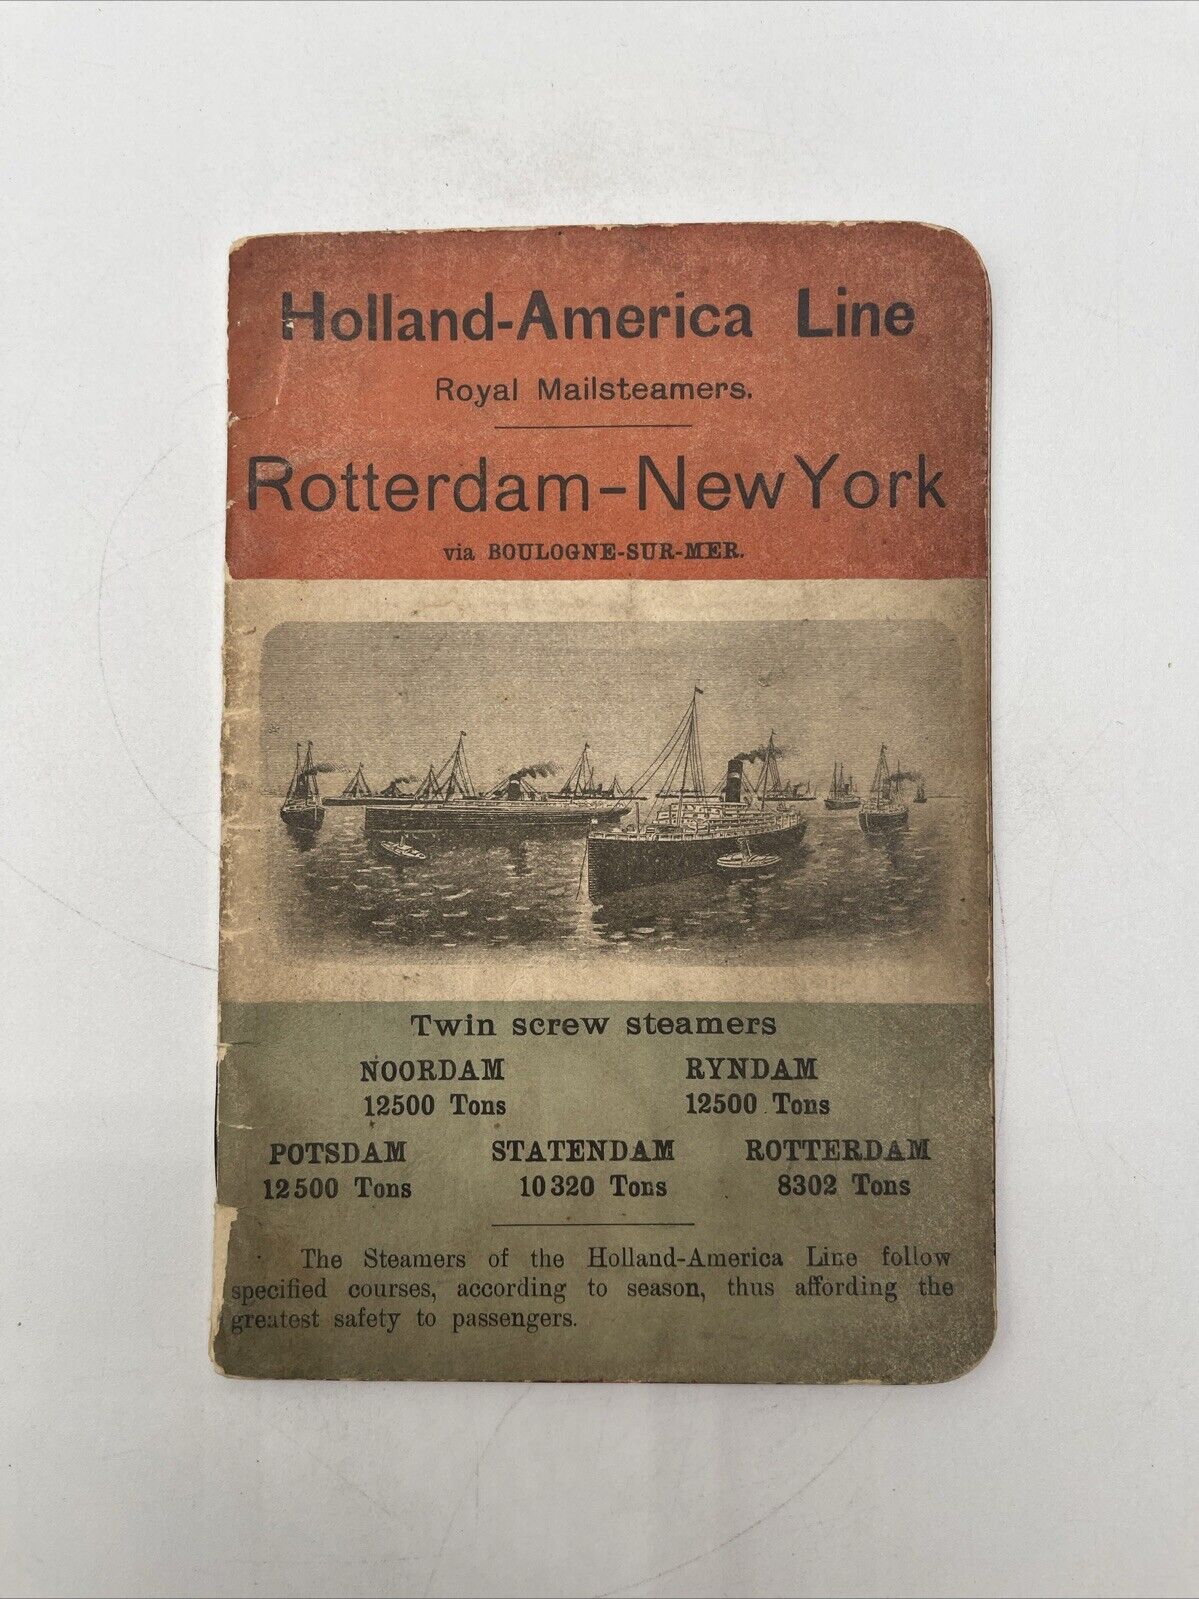 Holland America Line Royal Mailsteamers Rotterdam-NY Notebook 1903-04